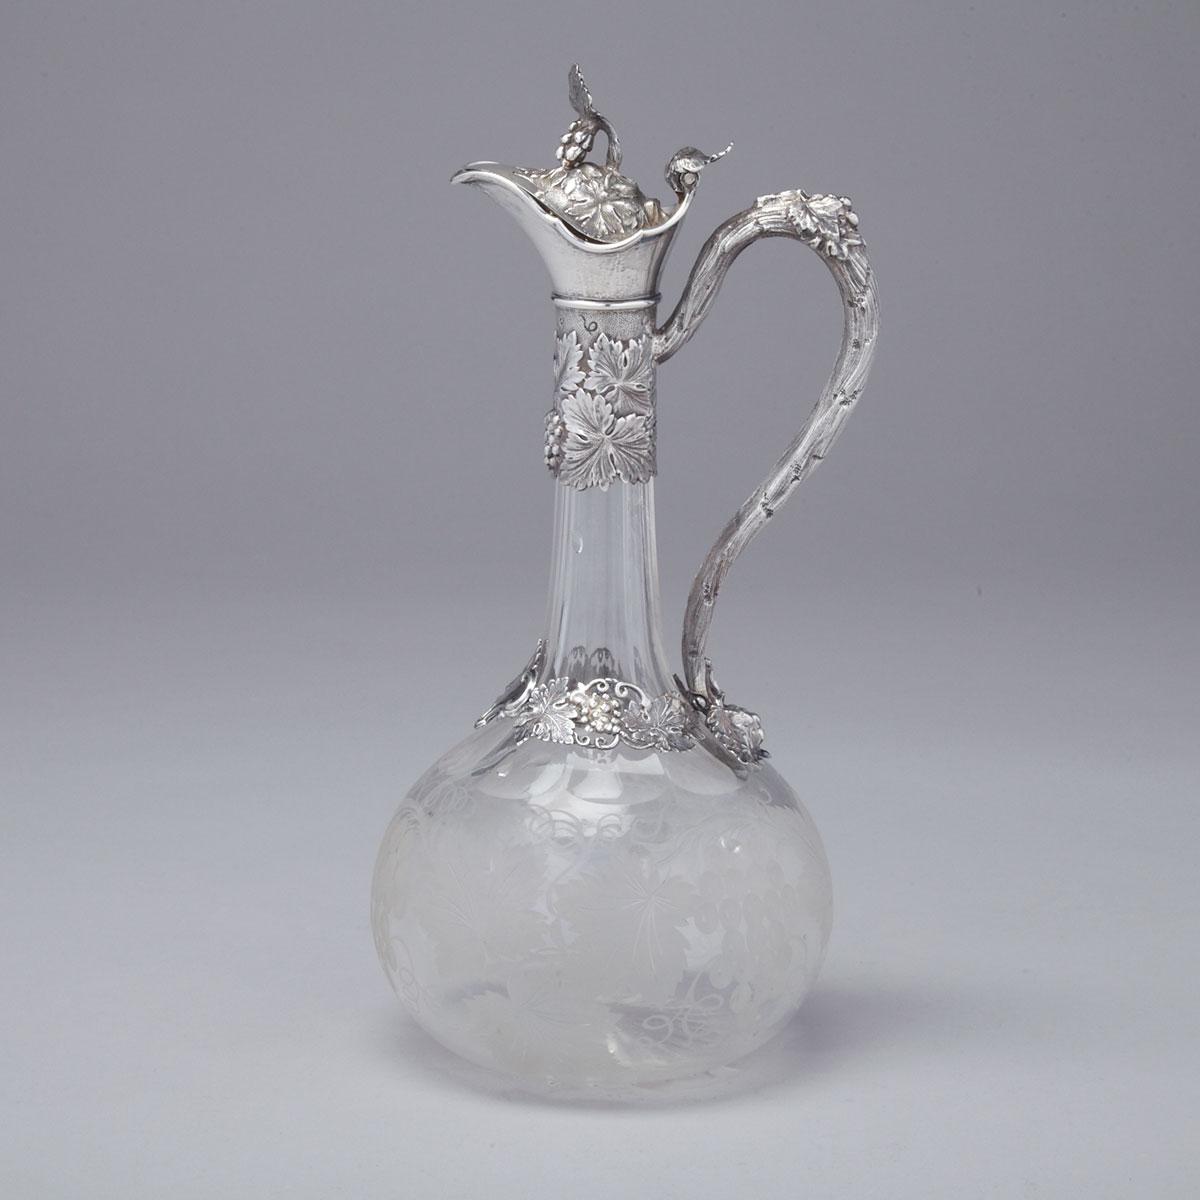 Victorian Silver Mounted Cut and Etched Glass Wine Jug, George Richards & Edward Brown, London, 1862